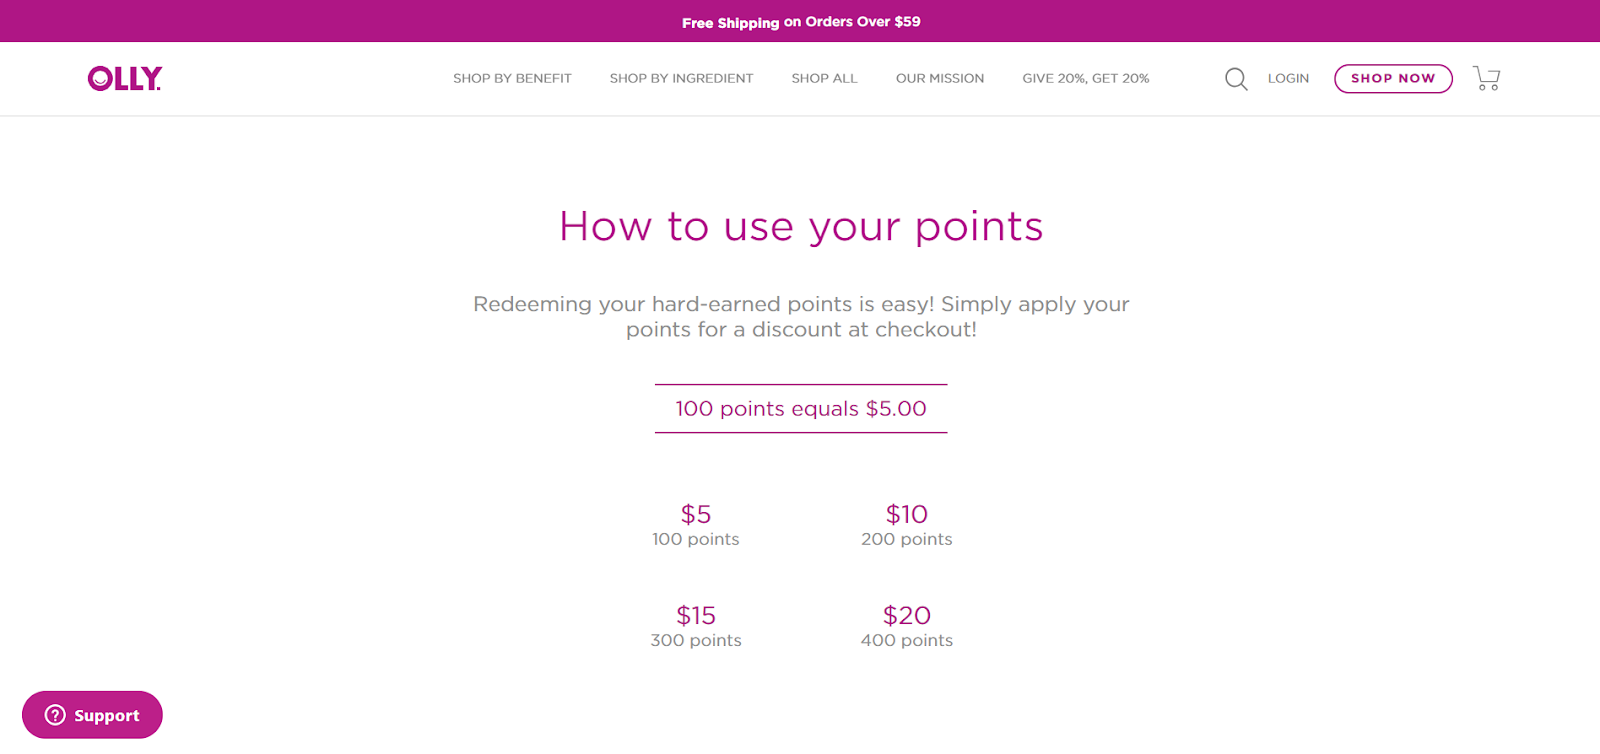 olly loyalty program landing page - Rewards and Perks Overview